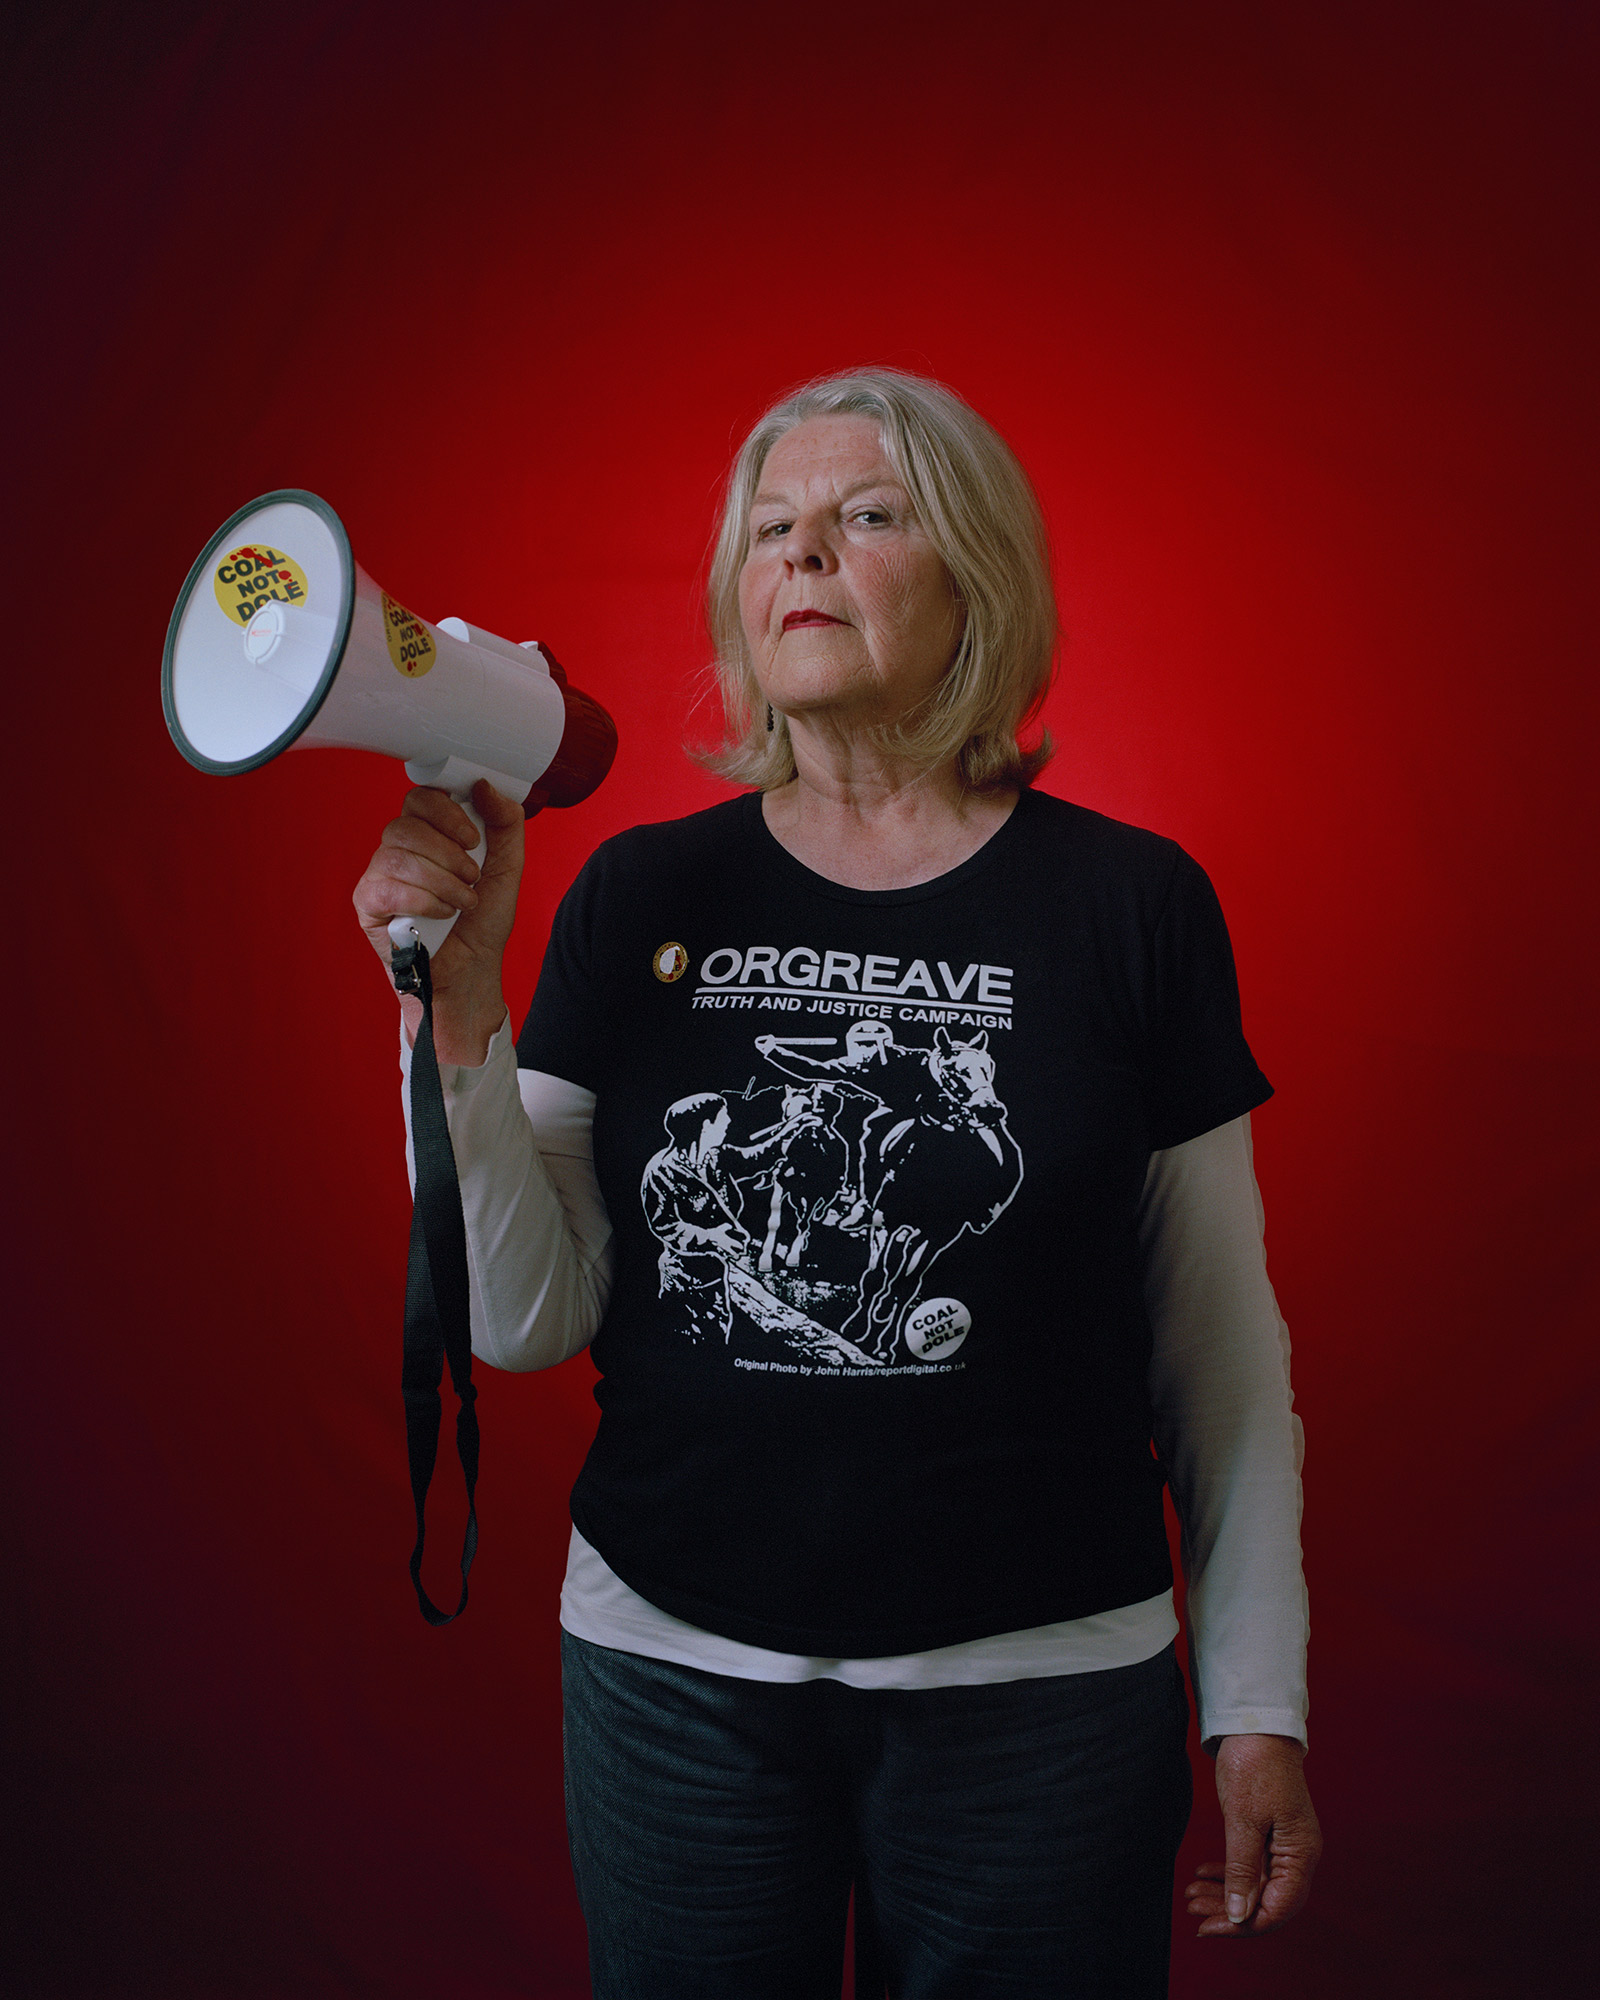 Barbara Jackson, secretary of the Orgreave Truth and Justice Campaign.